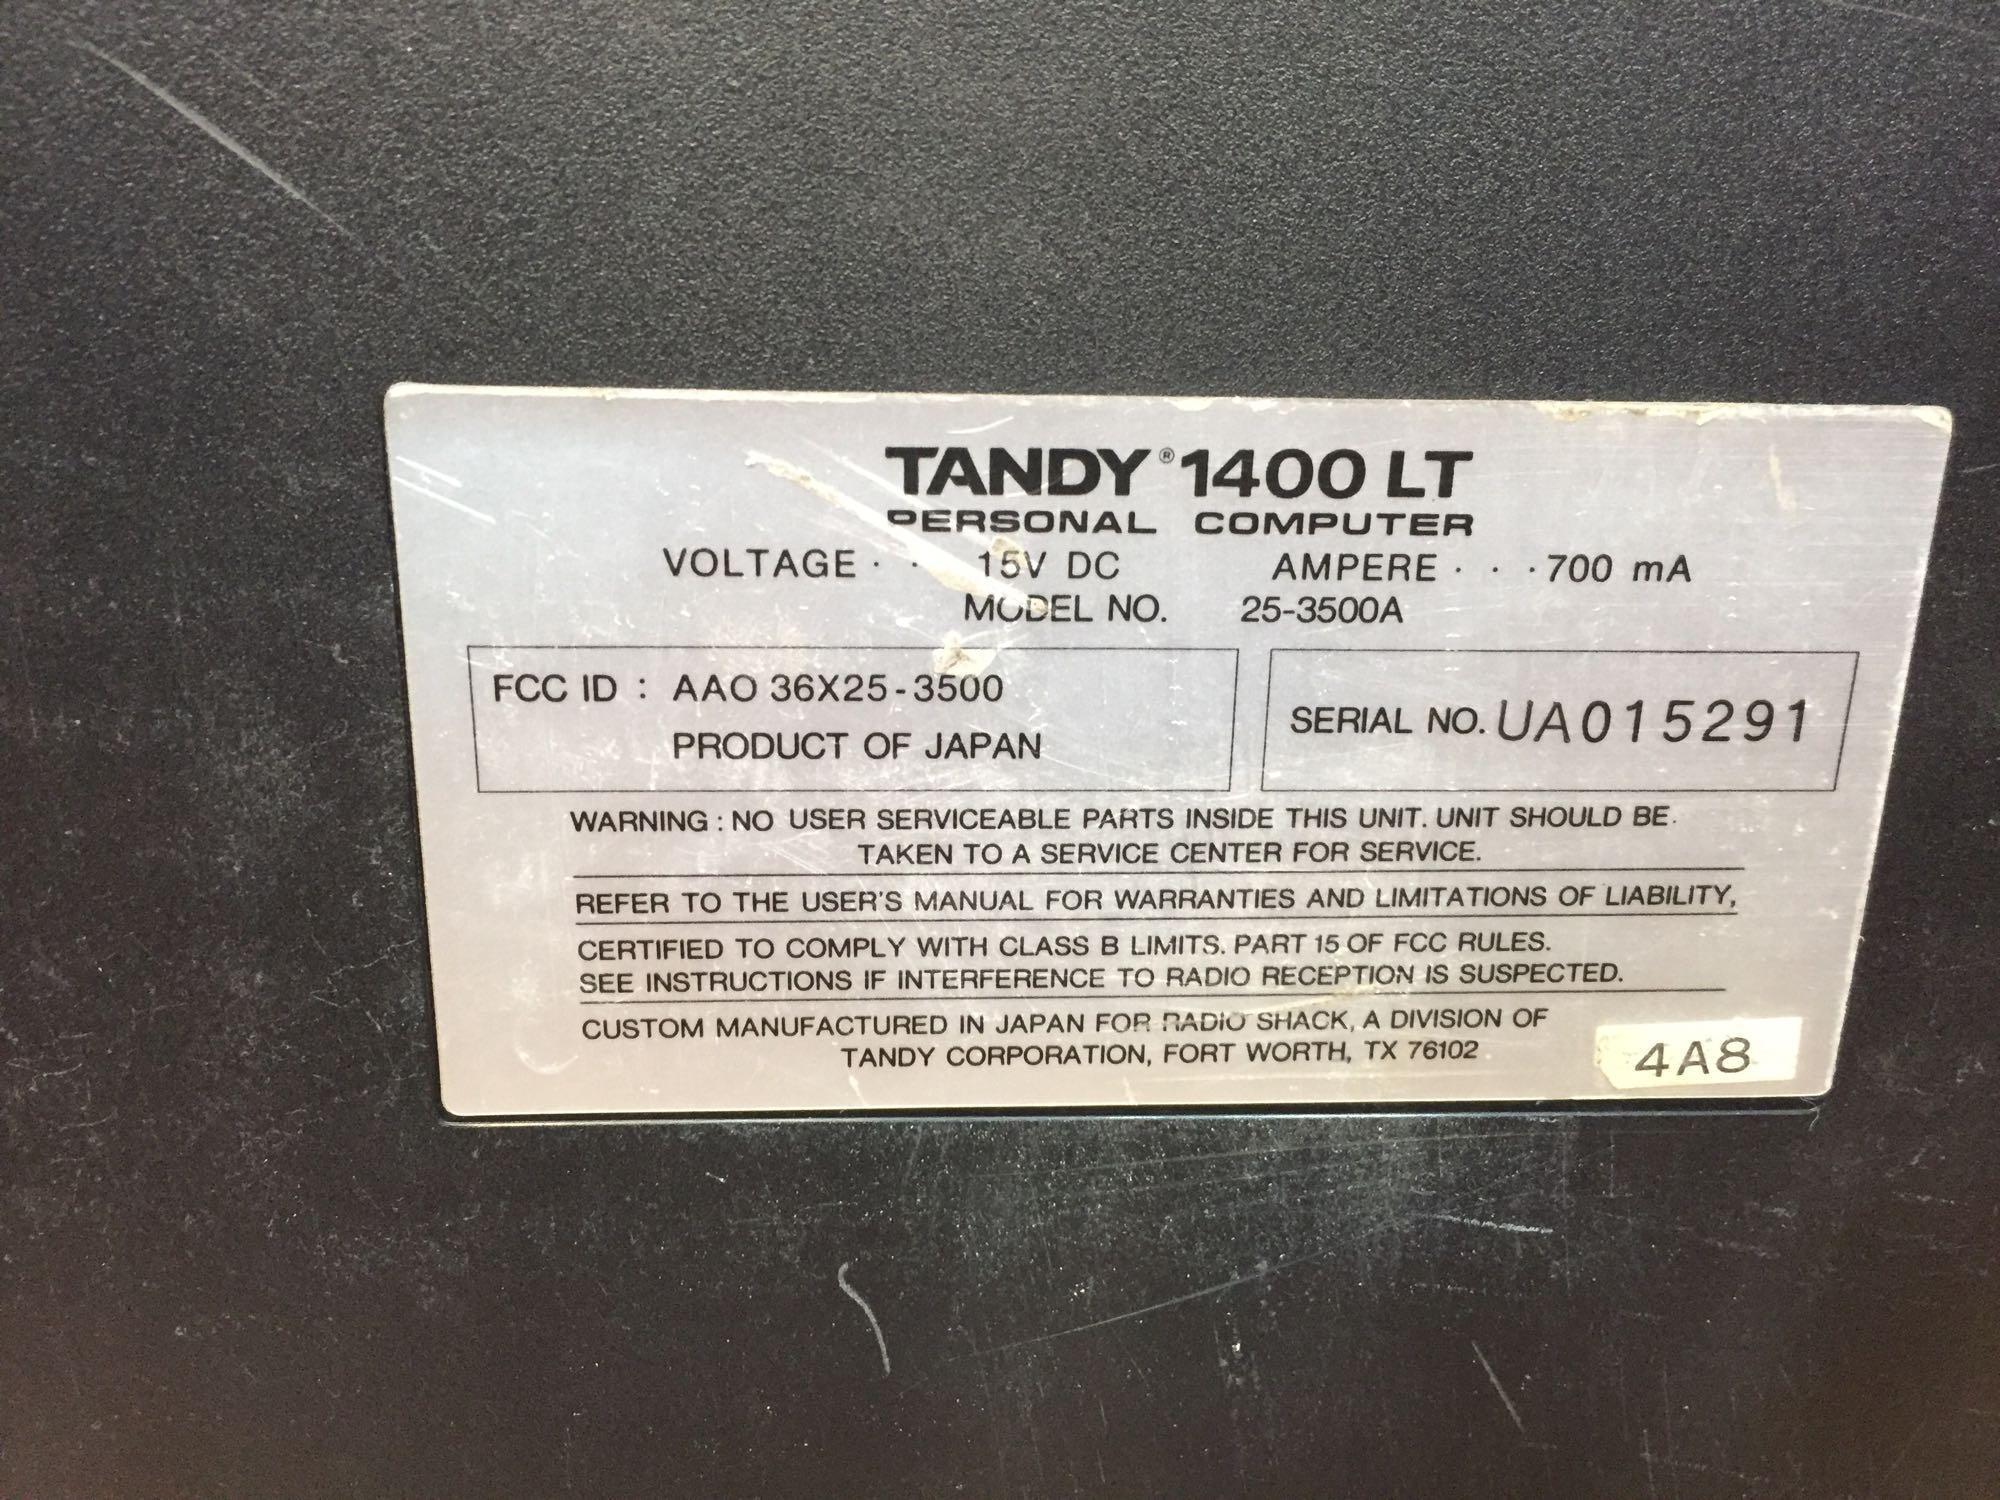 Tandy 1400 LT Personal Computer